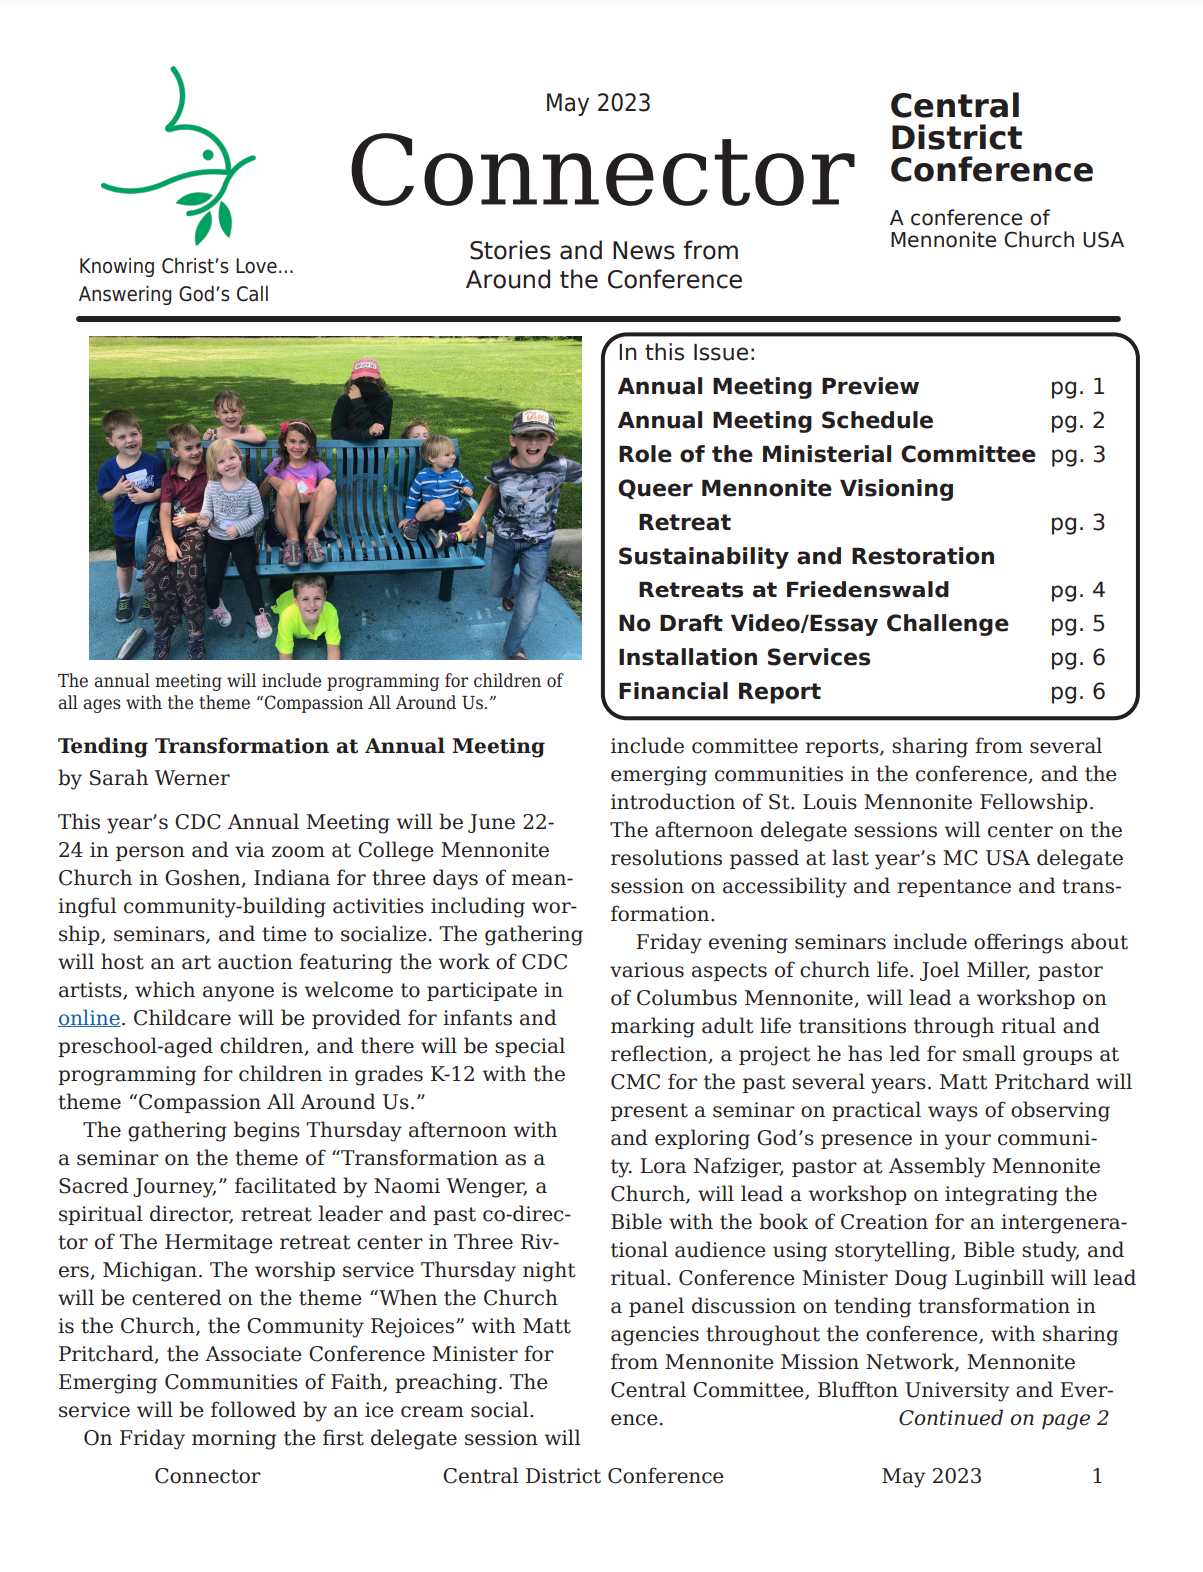 CDC Connector - May 2023 issue